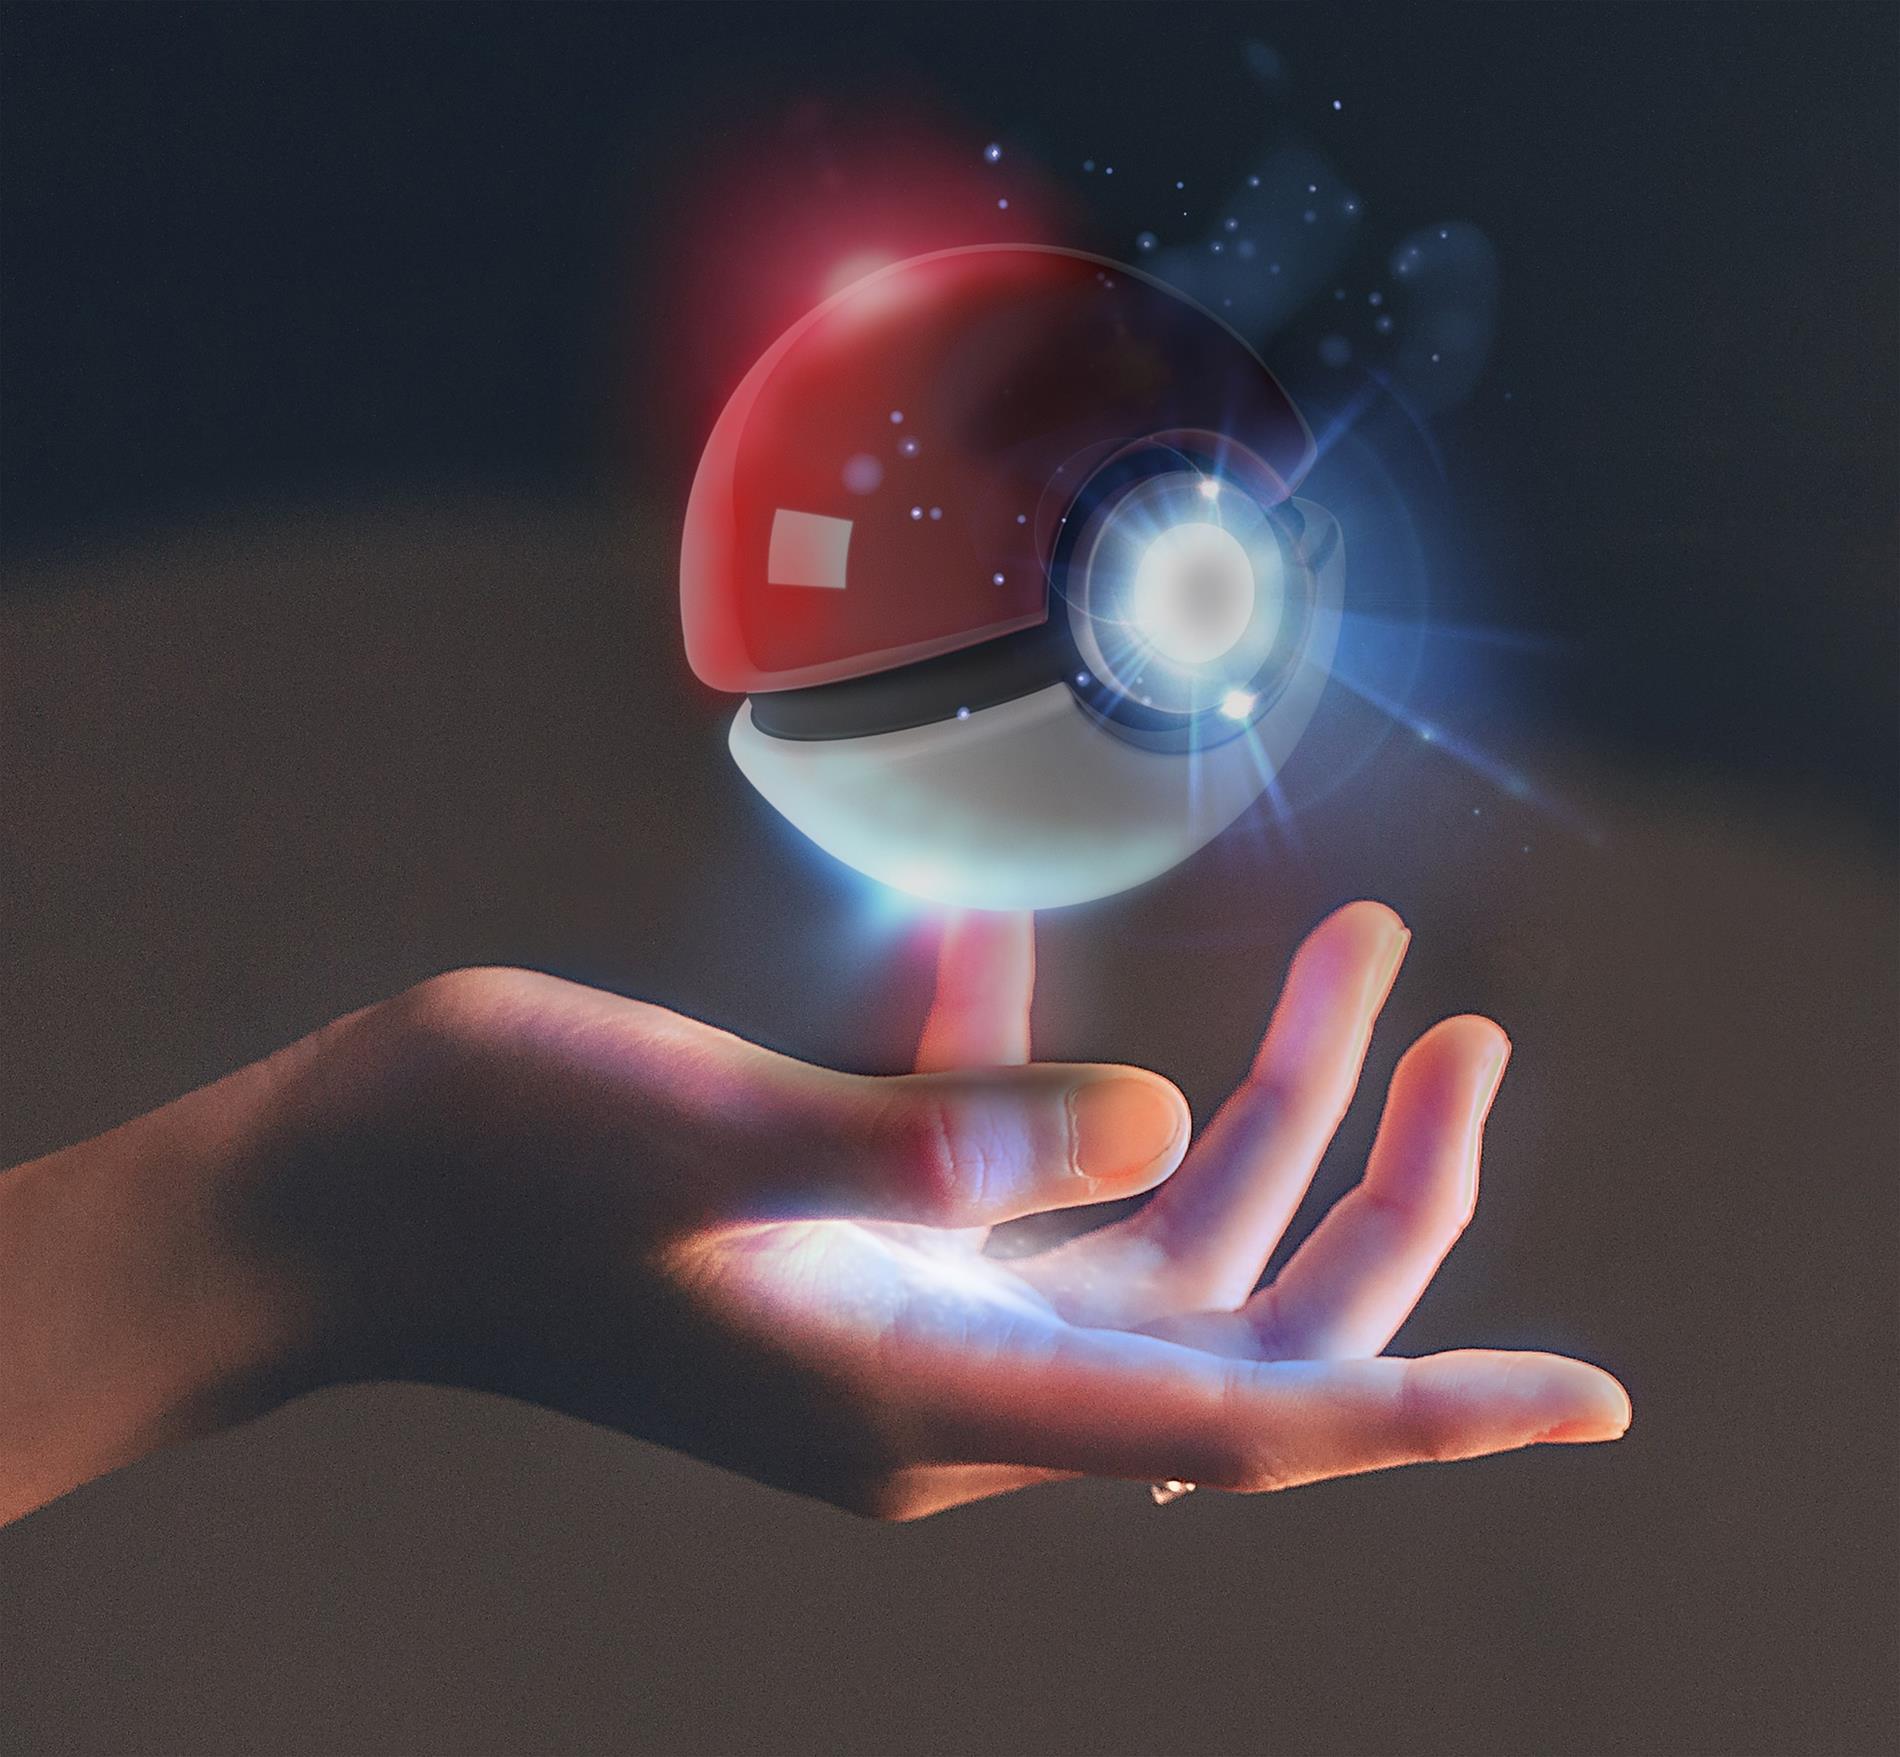 activating pokeball hivering above an open hand